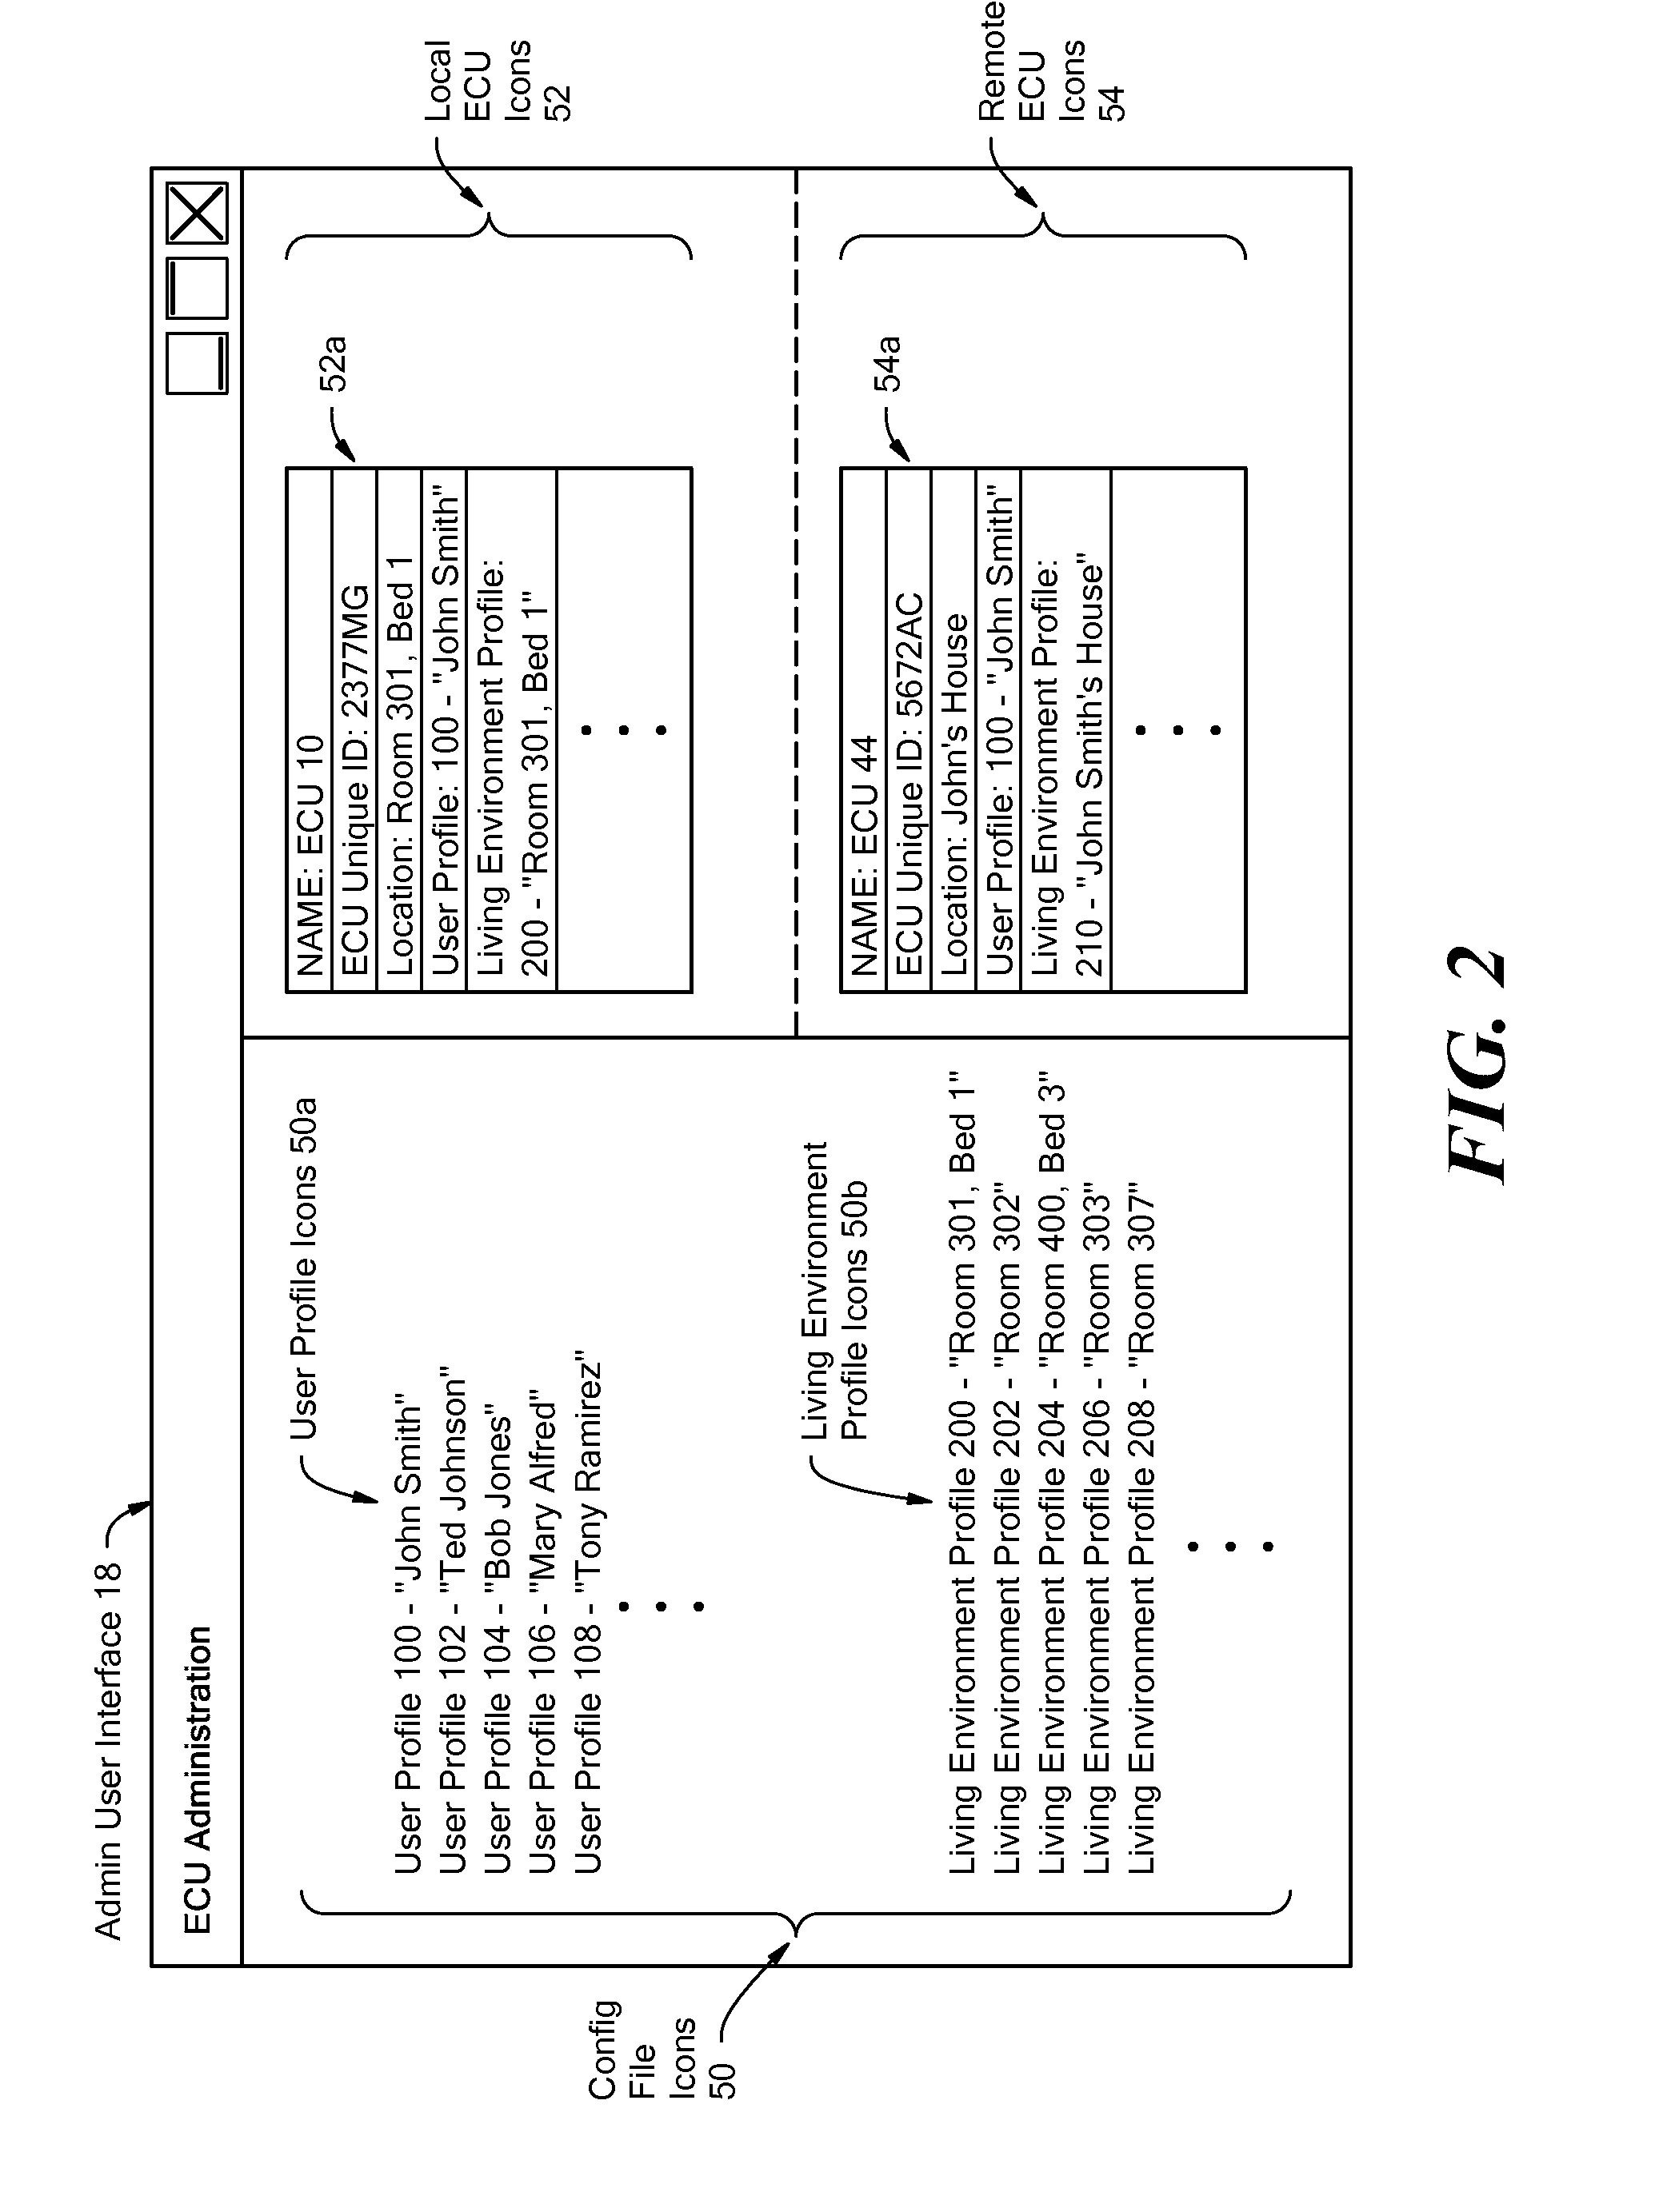 System and method for controlling a remote environmental control unit